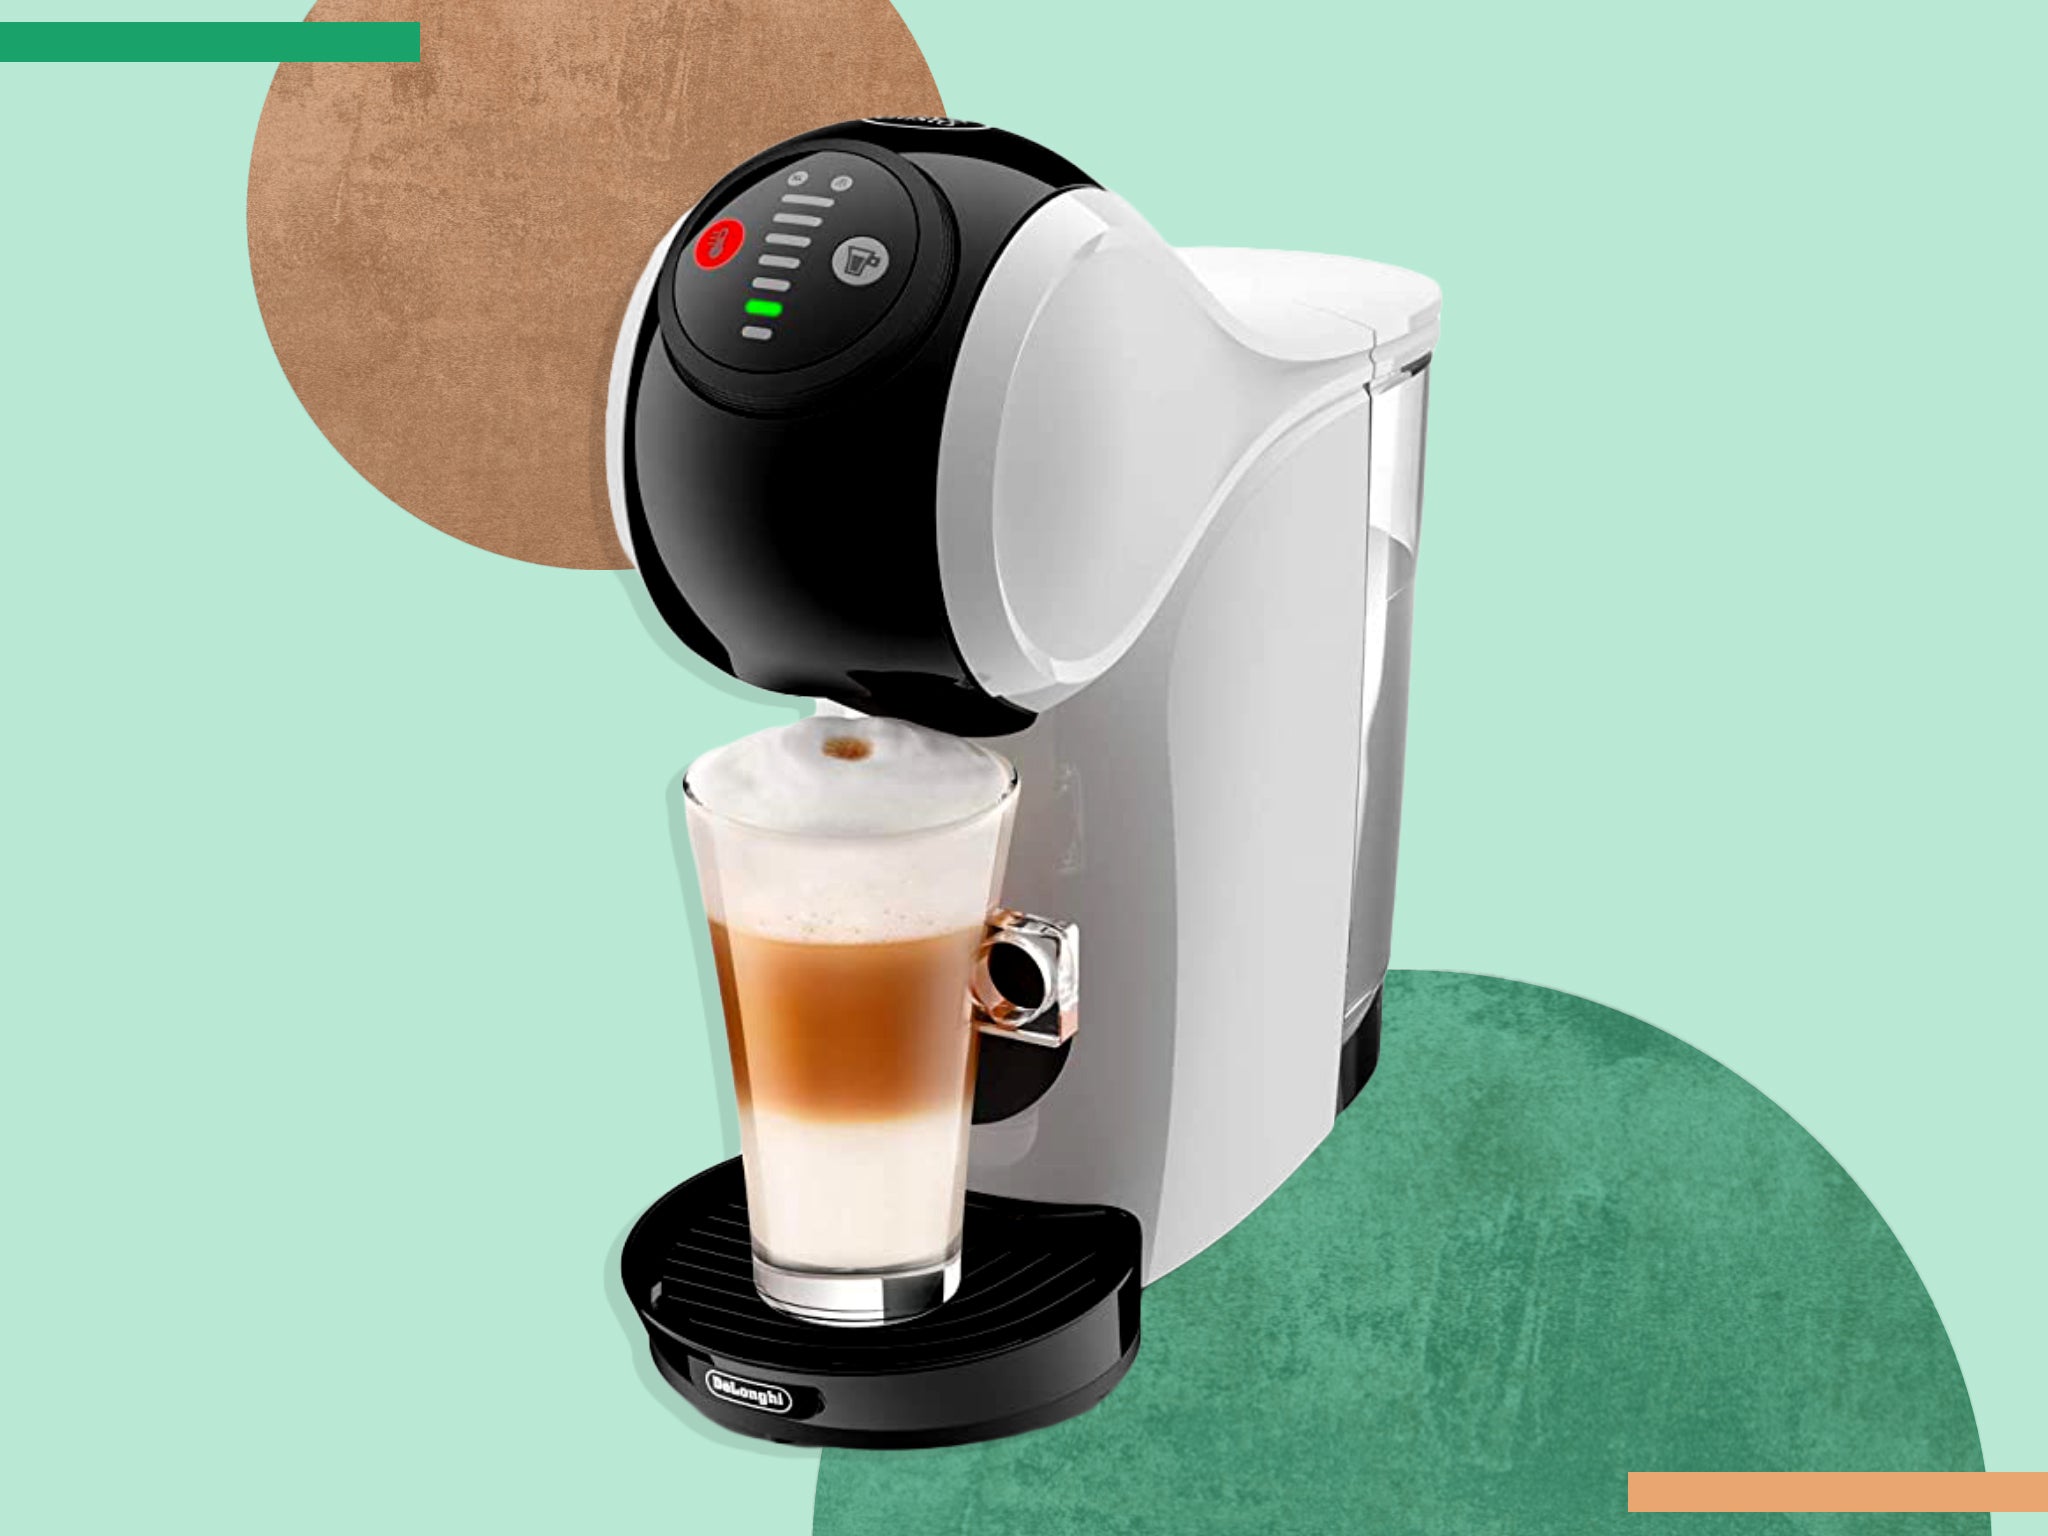 The Delonghi dolce gusto genio s gives you more than 40 different drinks at your fingertips